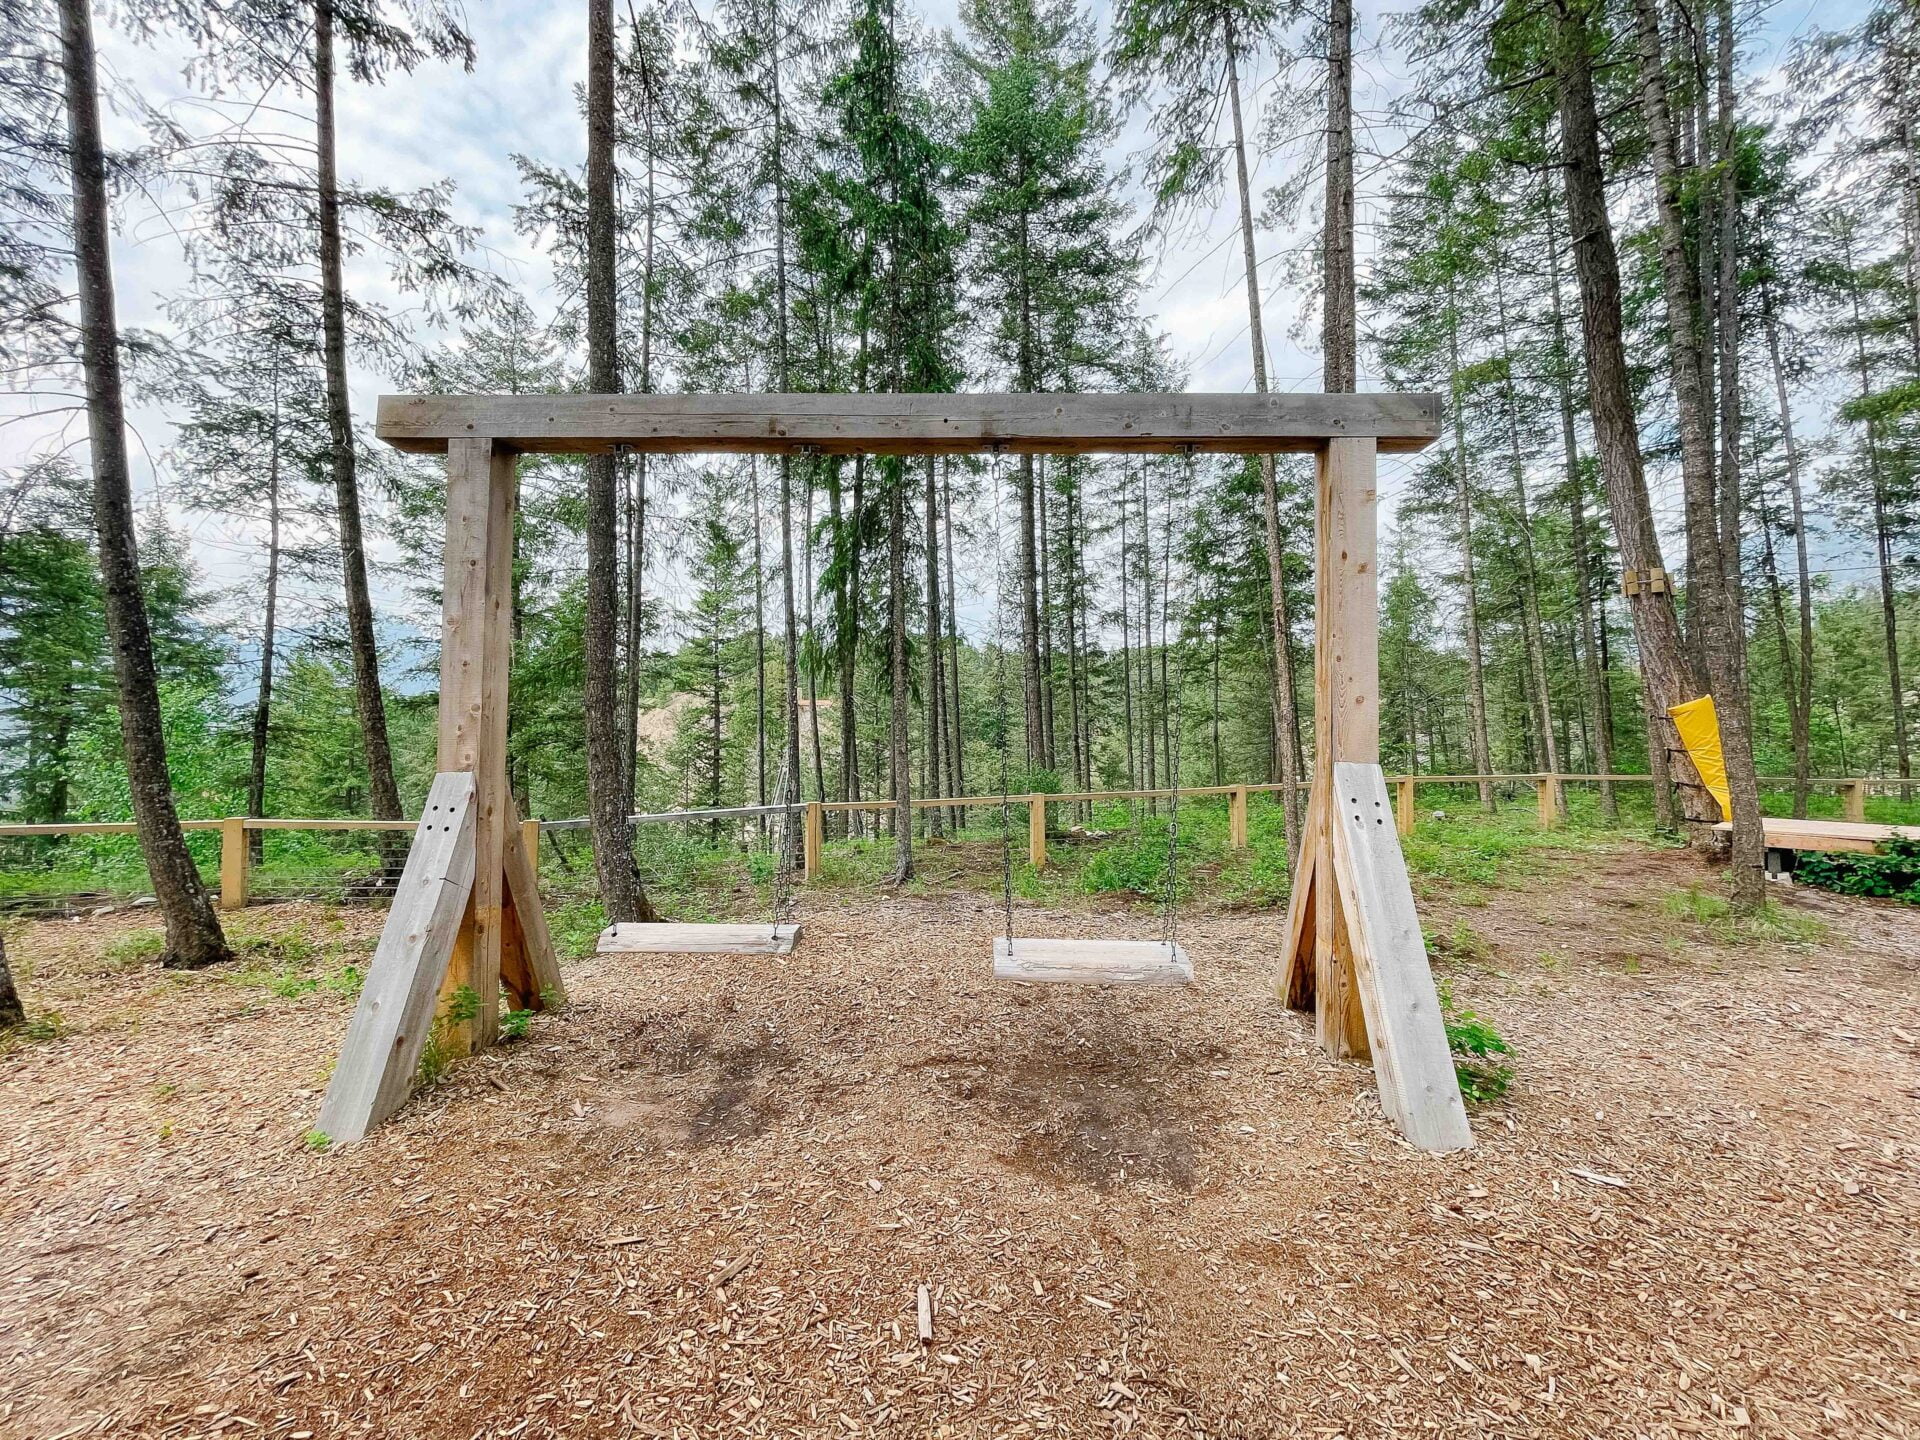 wooden swings at the playground area at the golden suspension bridge